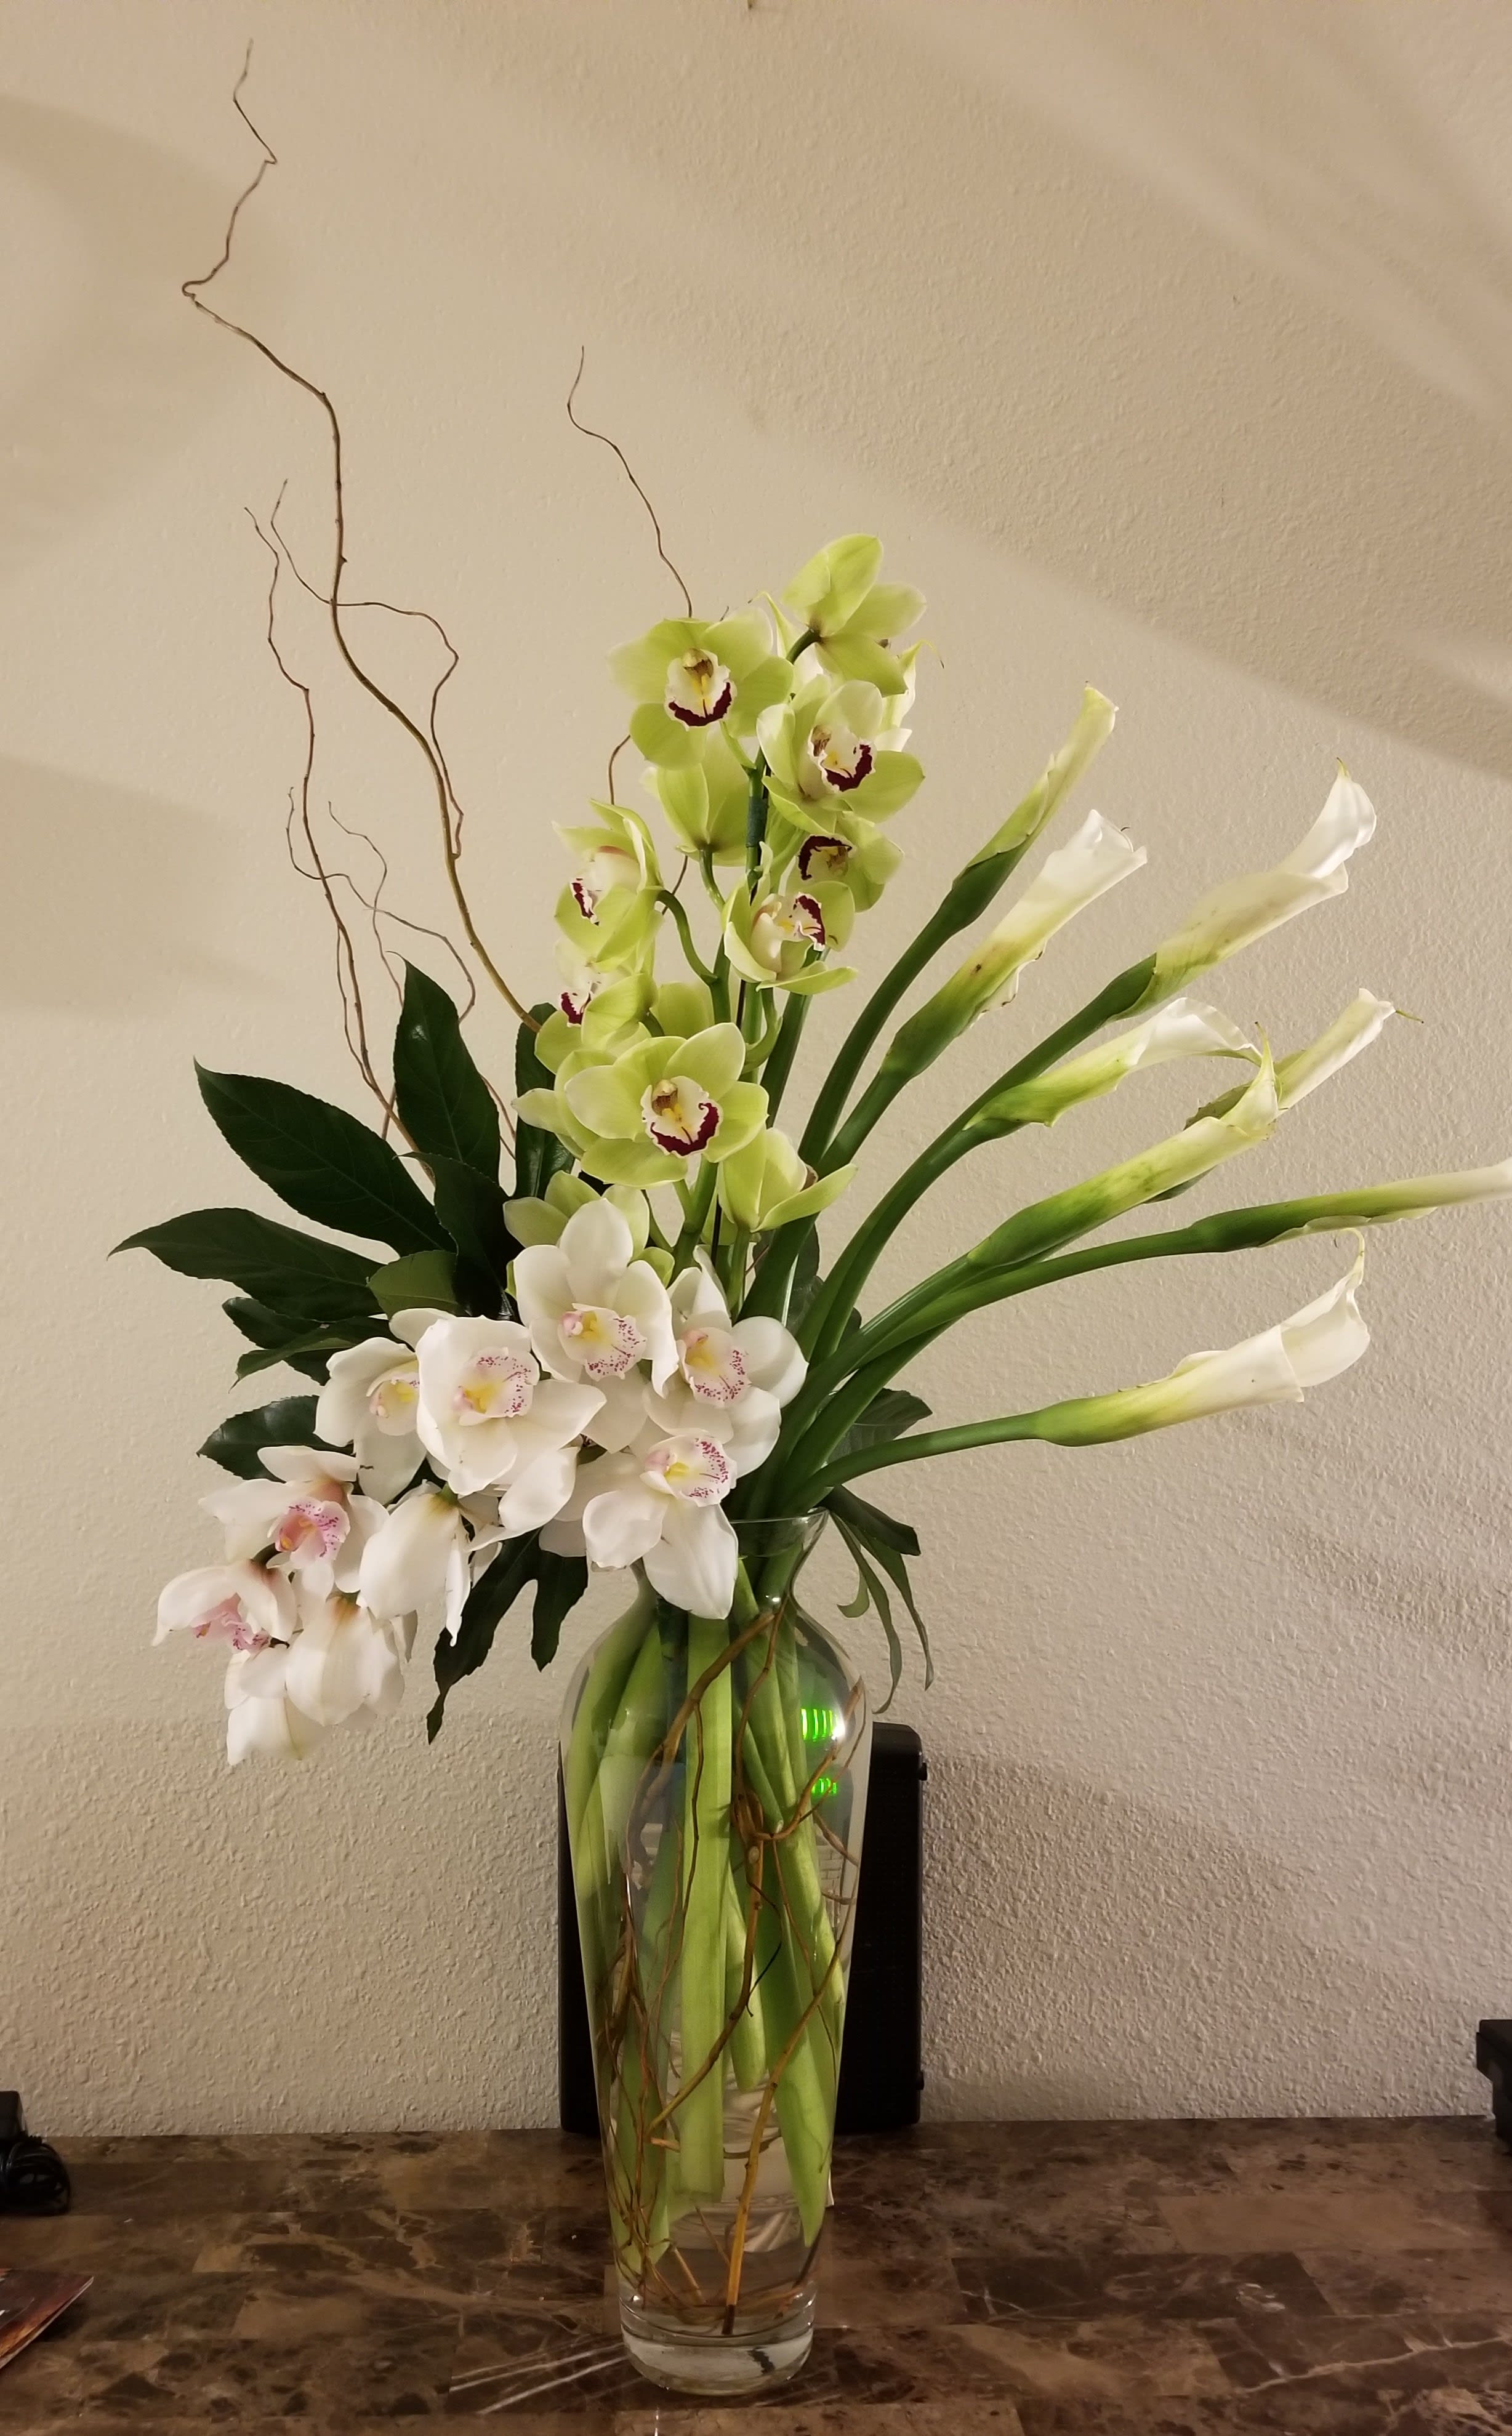 Orchids &amp; Calla Liles - Elegant arrangement of orchids and calla liles with some curly willow.